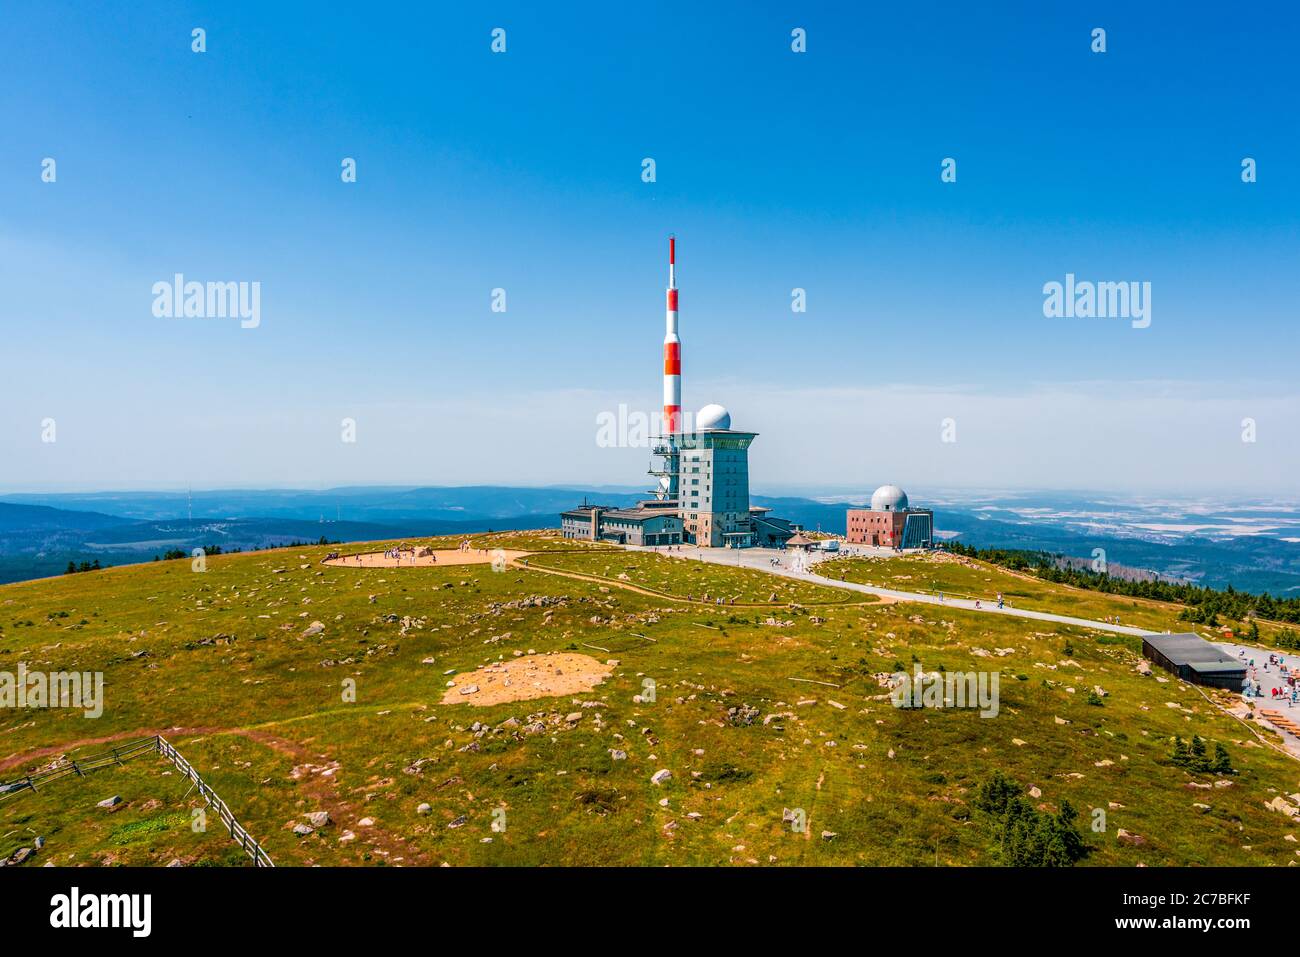 The Mountain 'Brocken' in Harz National Park, Germany Stock Photo